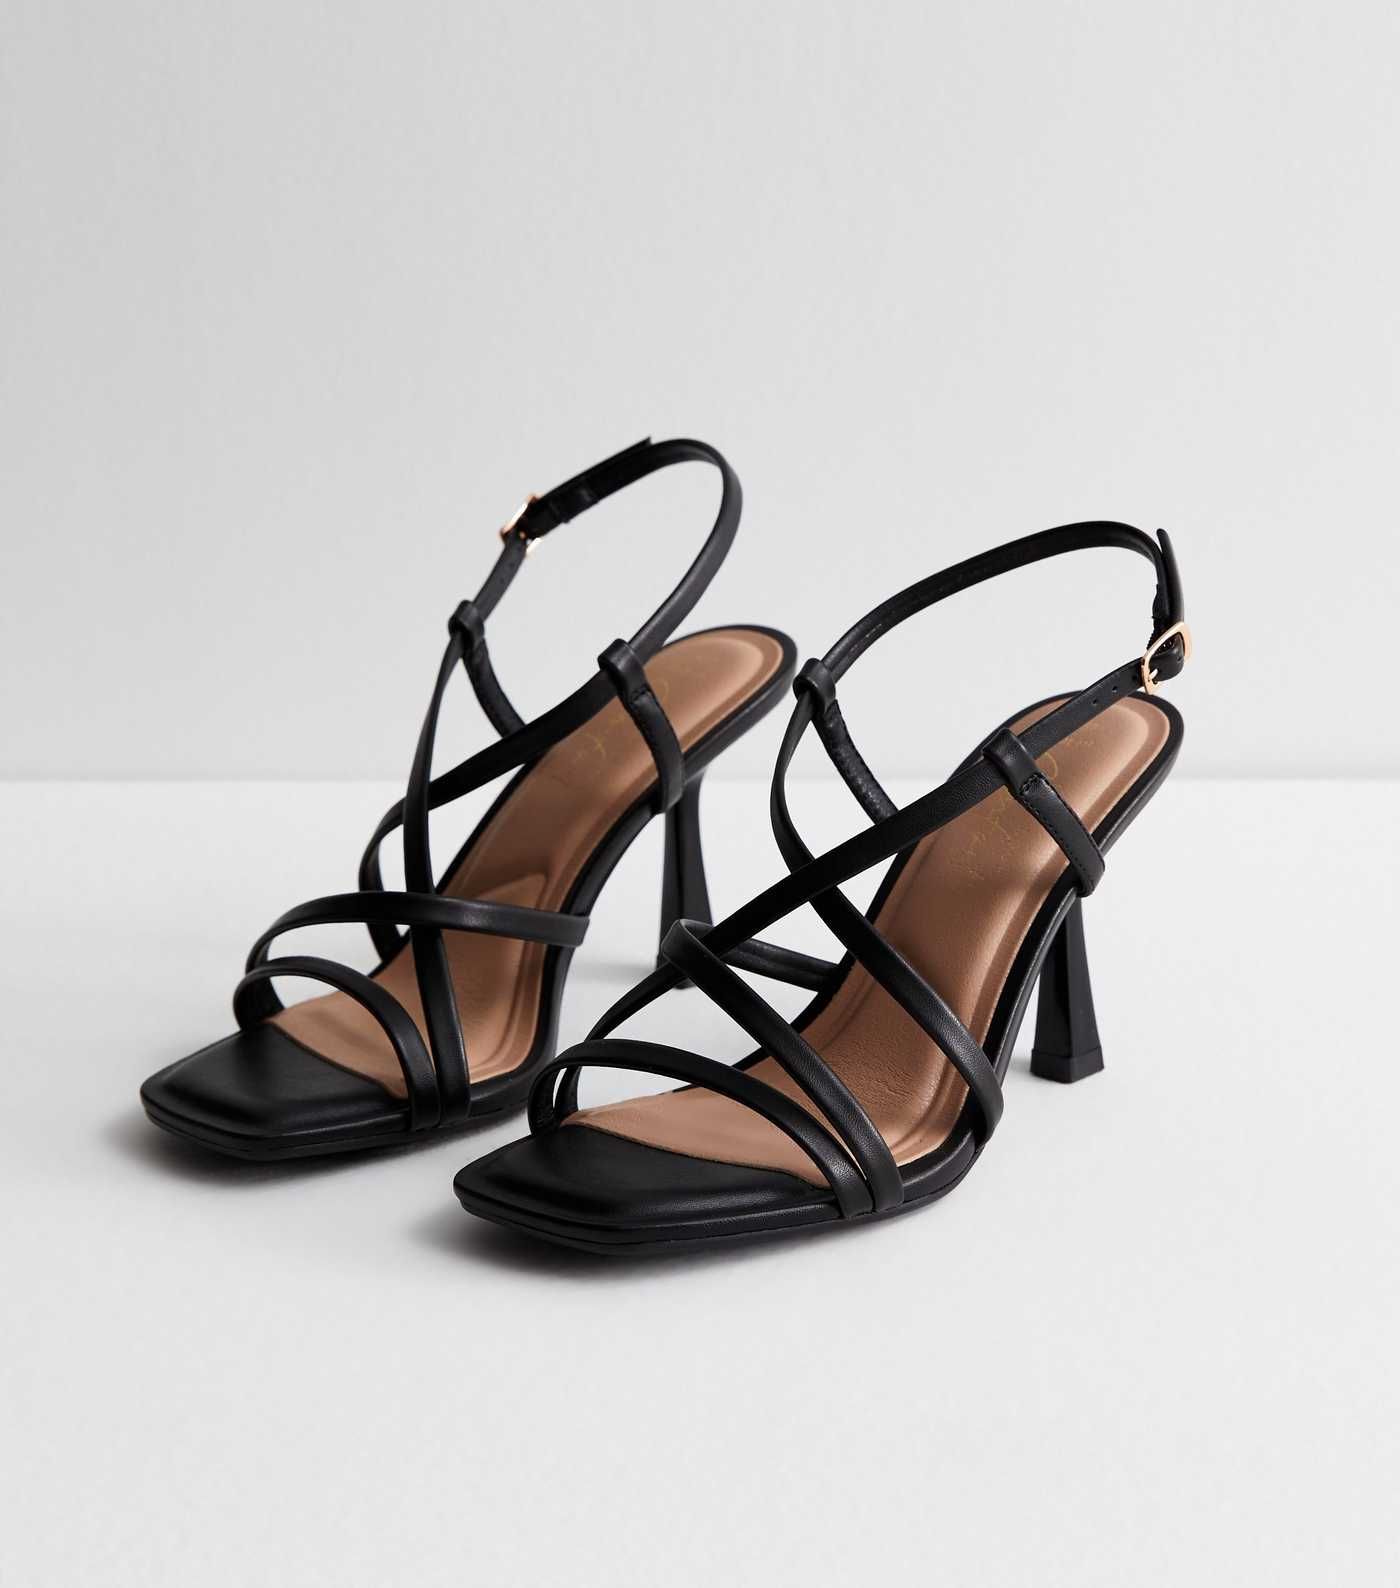 Wide Fit Black Strappy Stiletto Heel Sandals | New Look | New Look (UK)